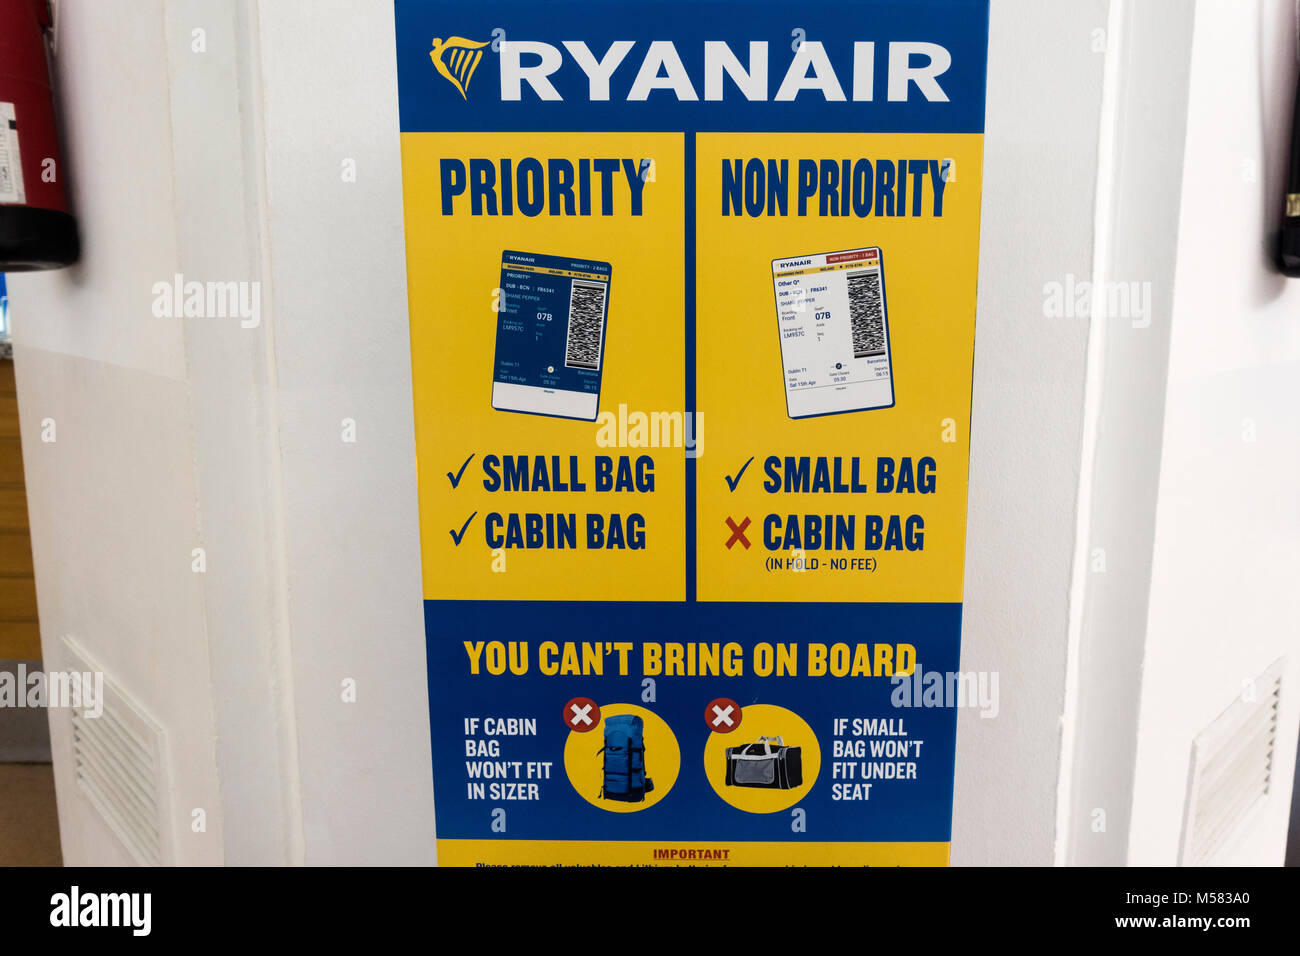 Ryanair new 2018 Cabin Baggage Rules, Hand Luggage size checker. Baggage measuring stand. Carry-on sizer with Ryan Air Priority Boarding allowances. Stock Photo